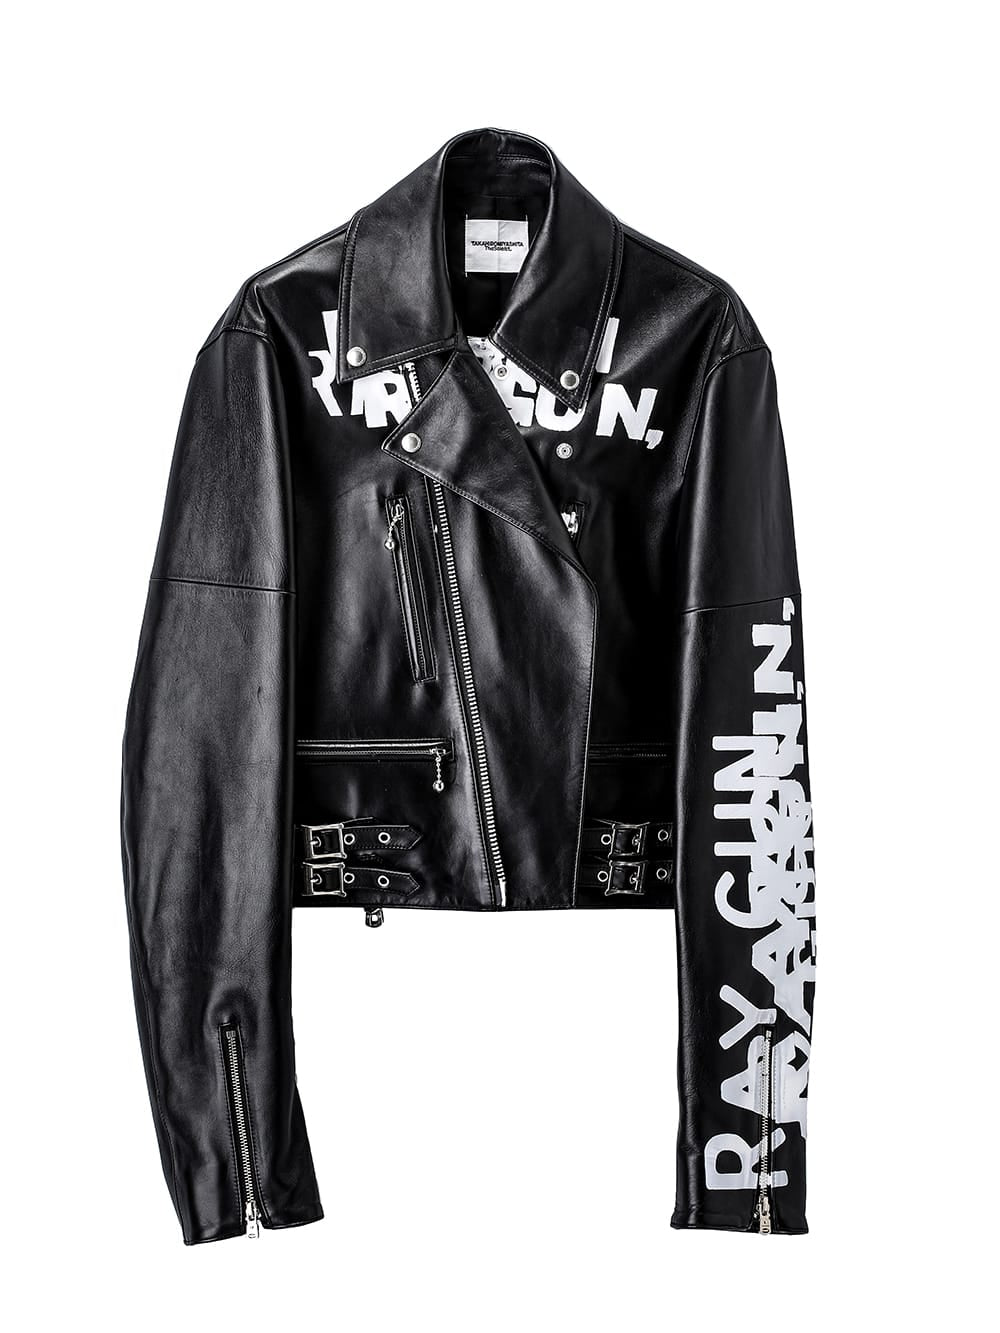 sj.0019aAW23-black two-way cropped riders jacket. THE TWO OF US ...